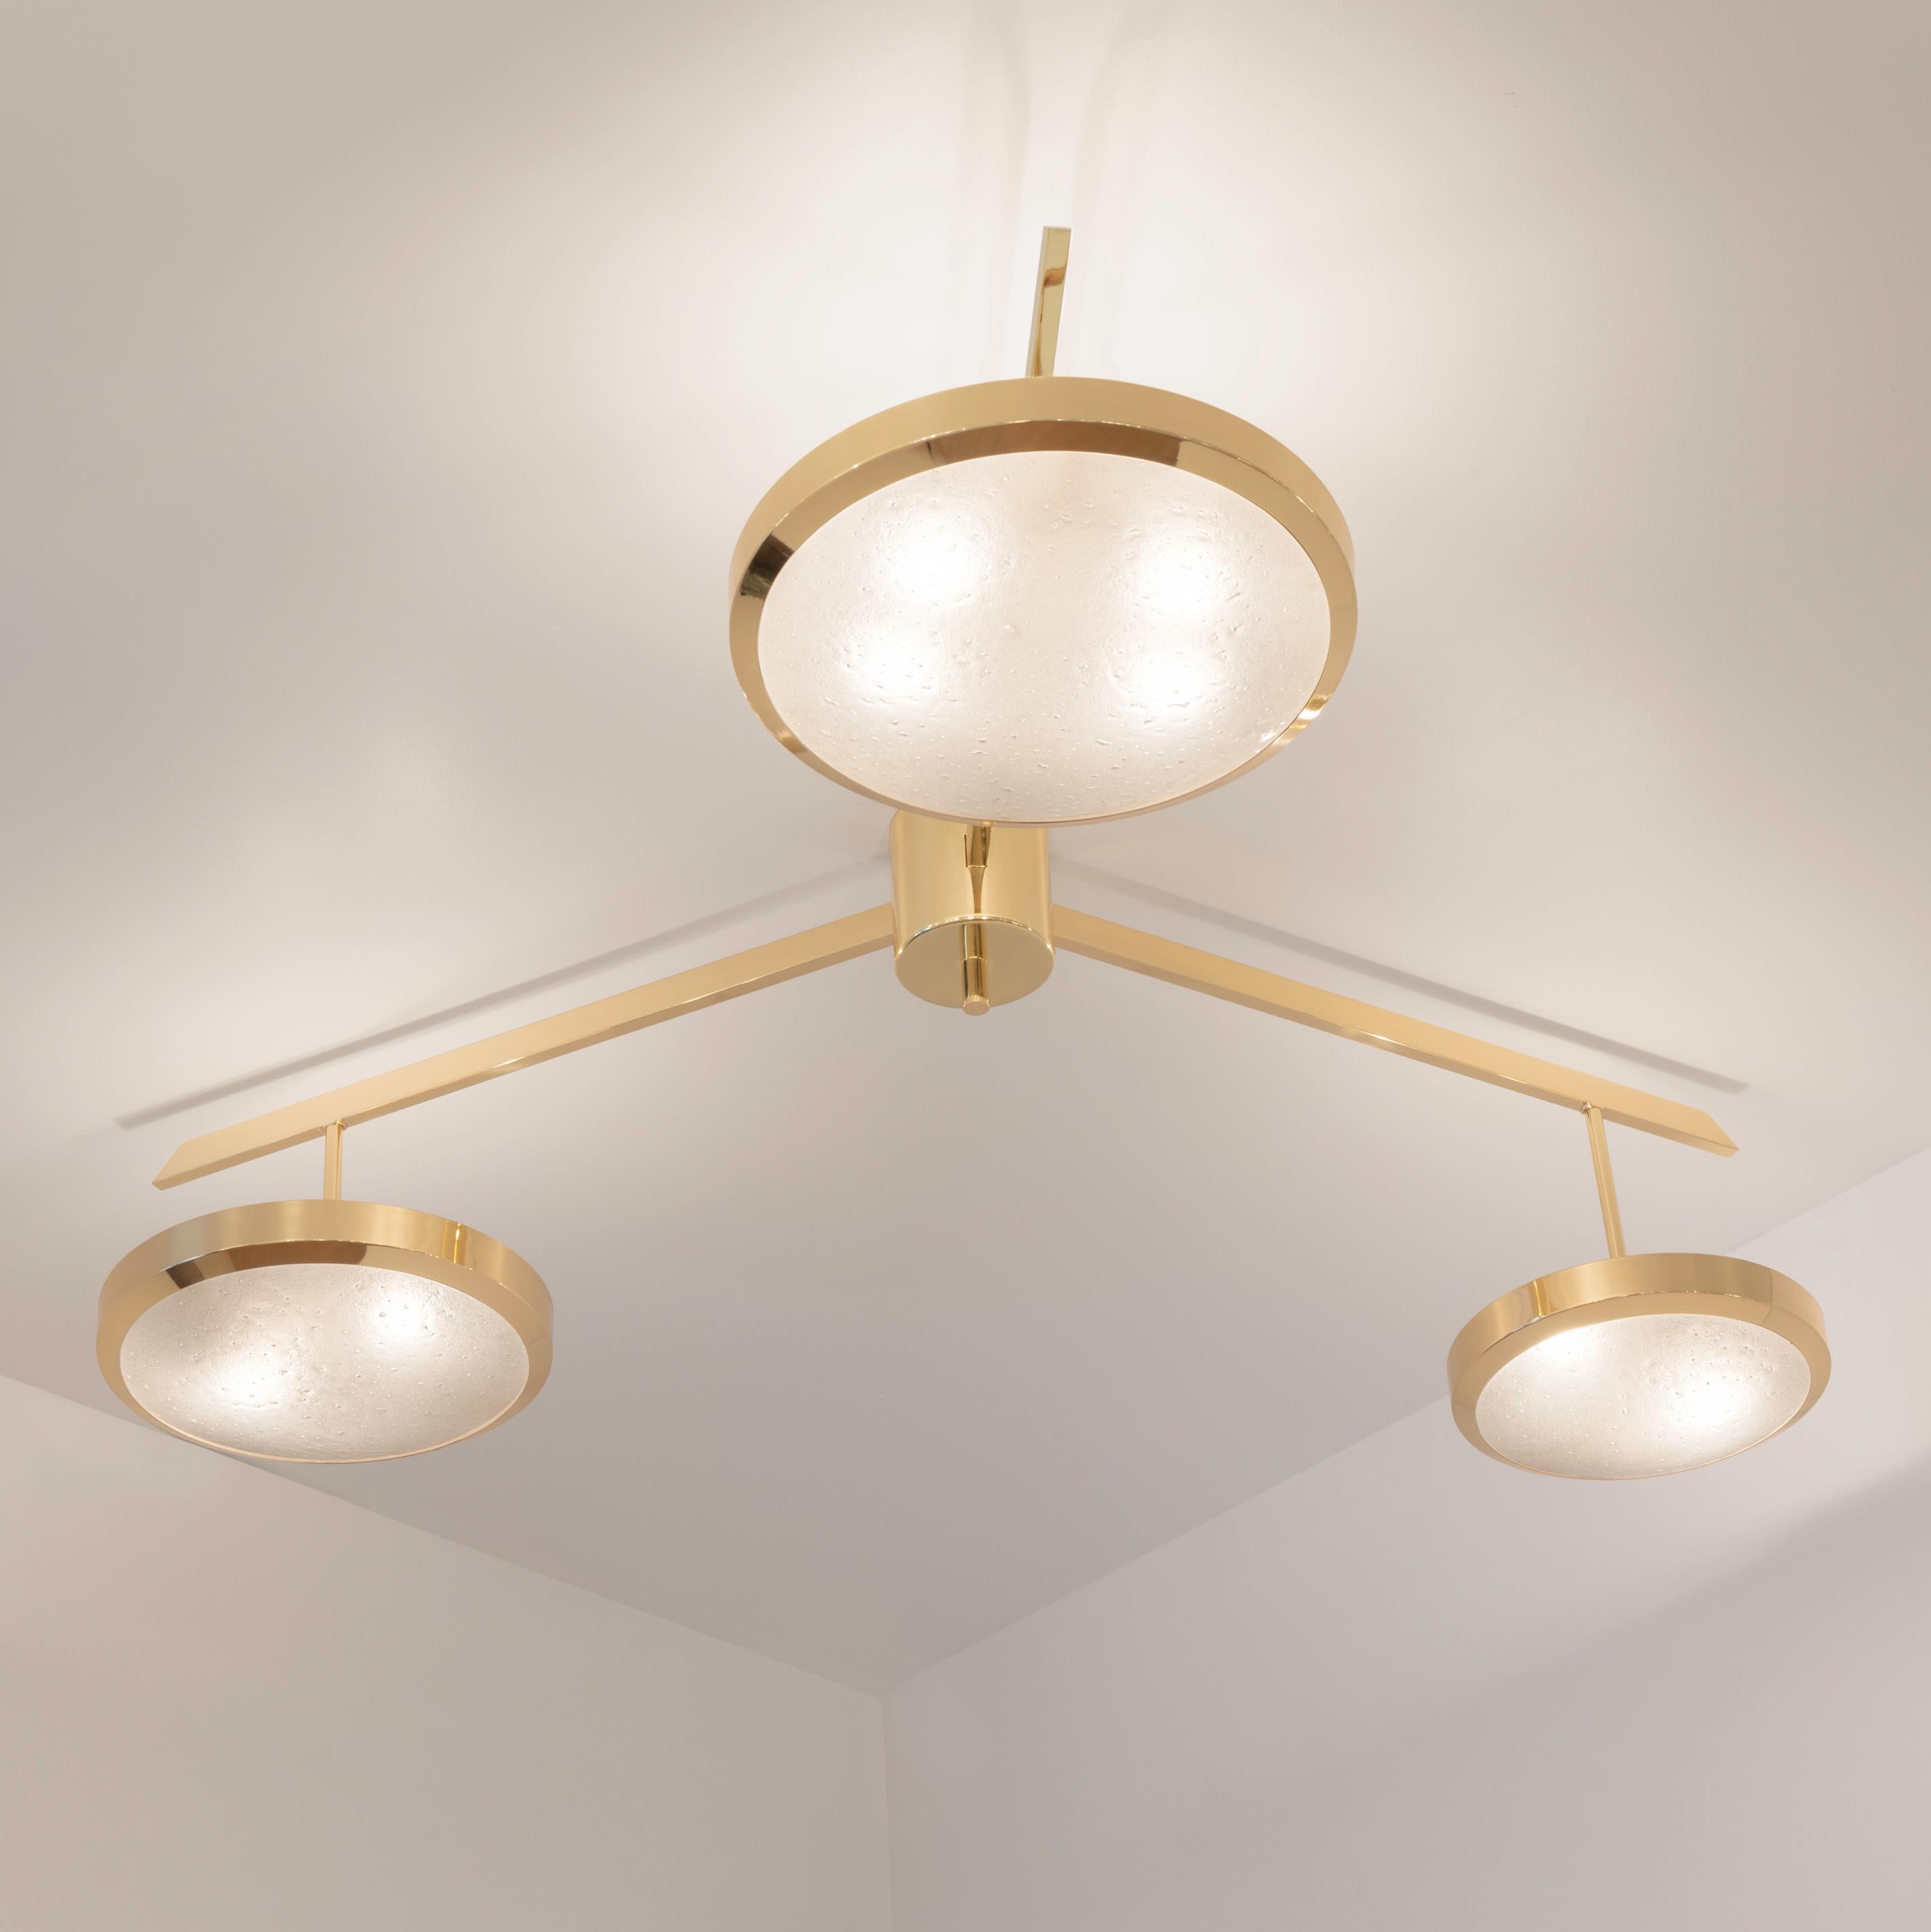 Italian Tre Ceiling Light by Gaspare Asaro - Polished Brass Finish For Sale